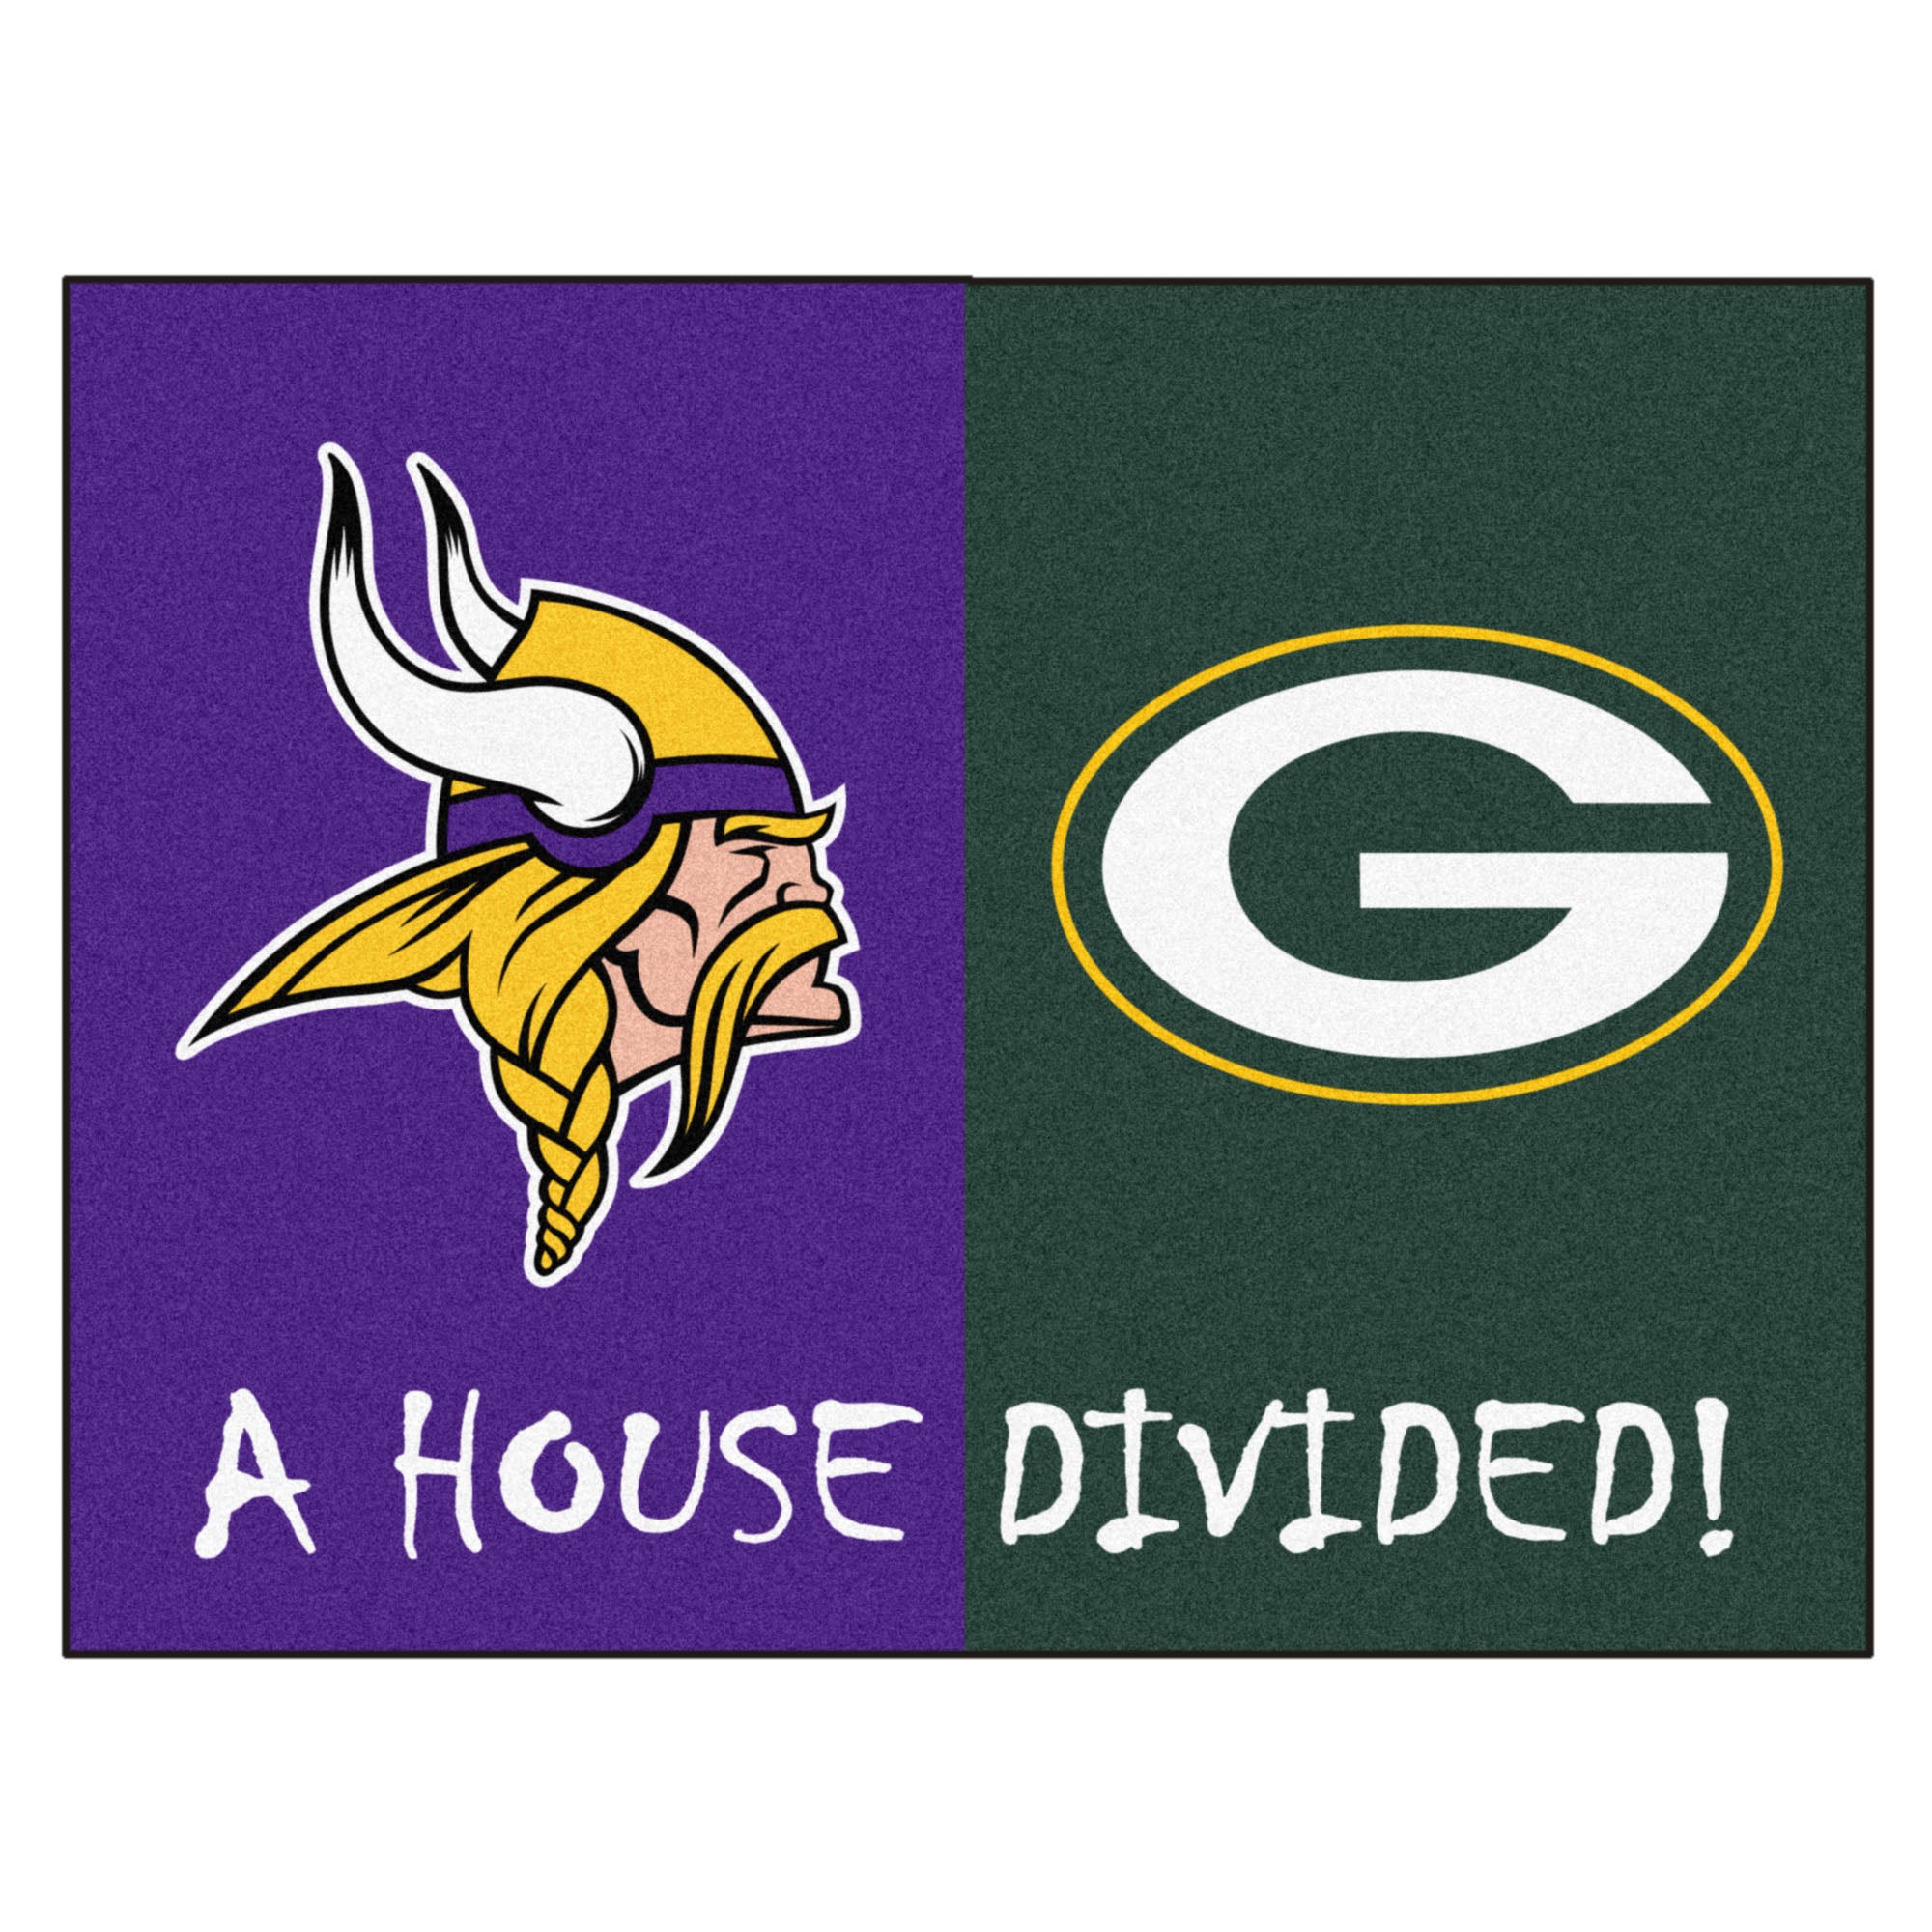 NFL House Divided - Vikings / Packers House Divided Mat